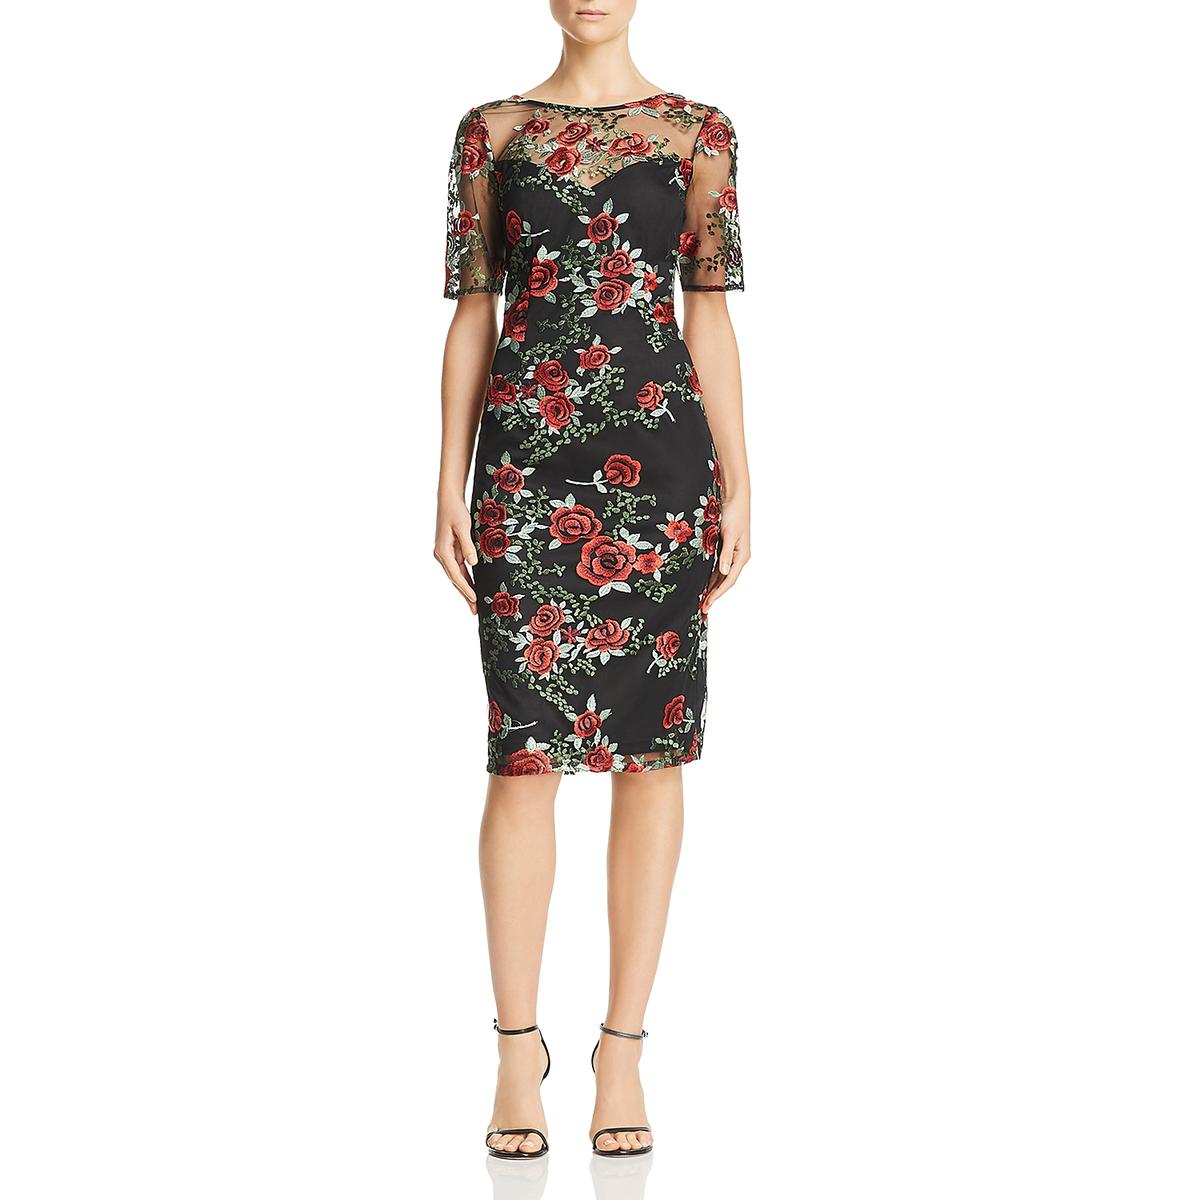 Adrianna Papell Womens Black Embroidered Cocktail Sheath Dress 12 BHFO ...